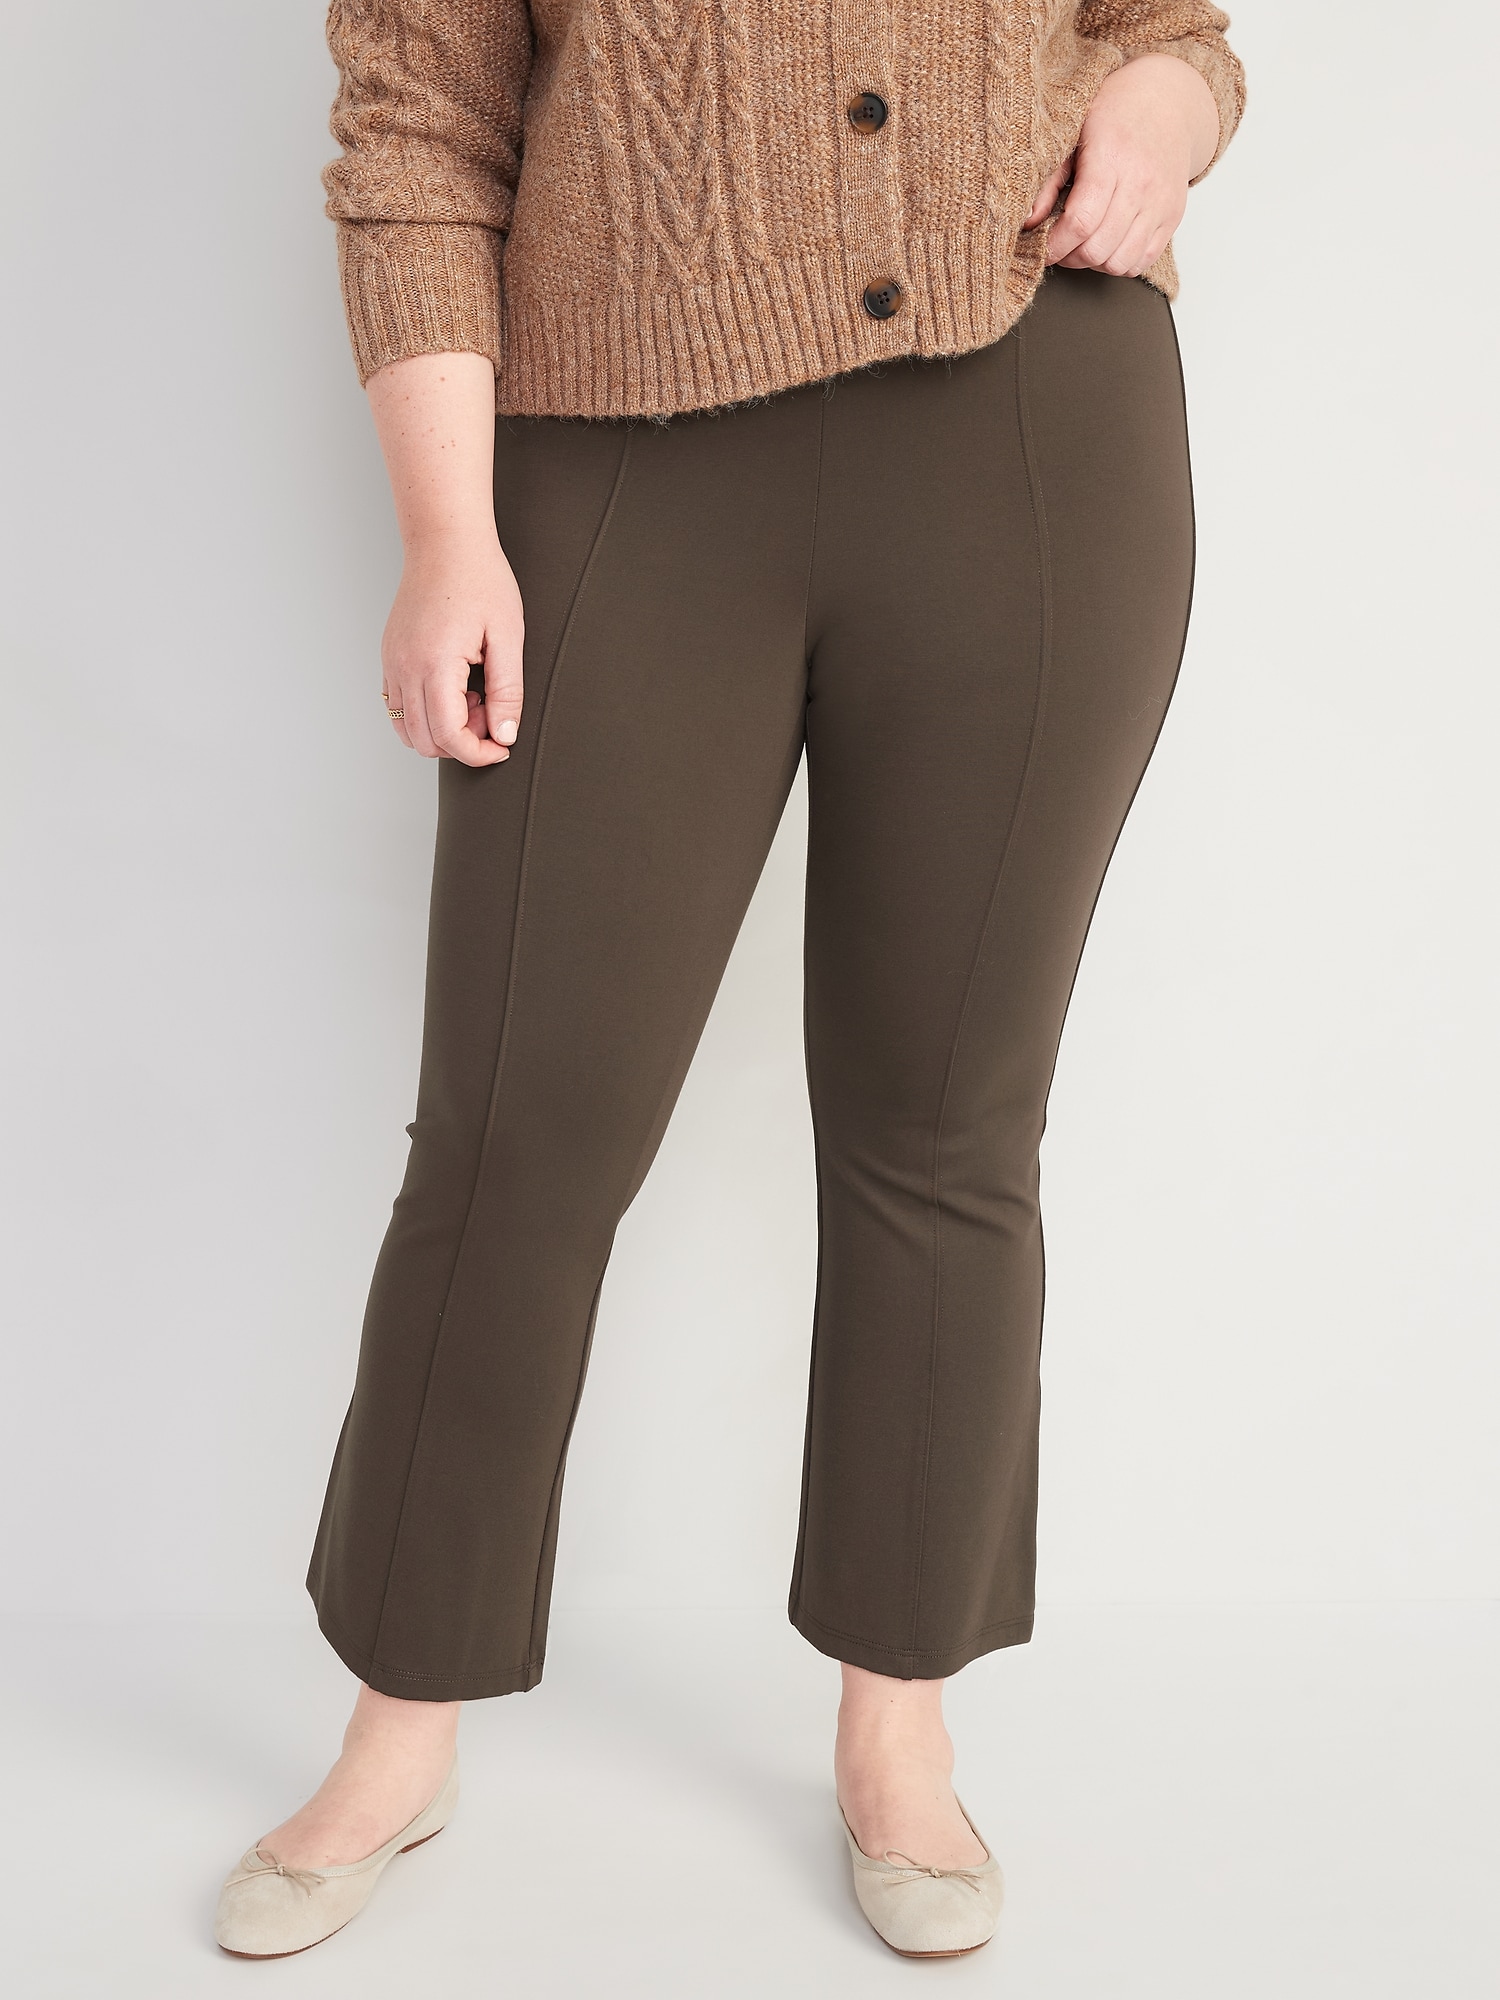 High Waist Brown Rayon Girls Compression Jegging, Casual Wear